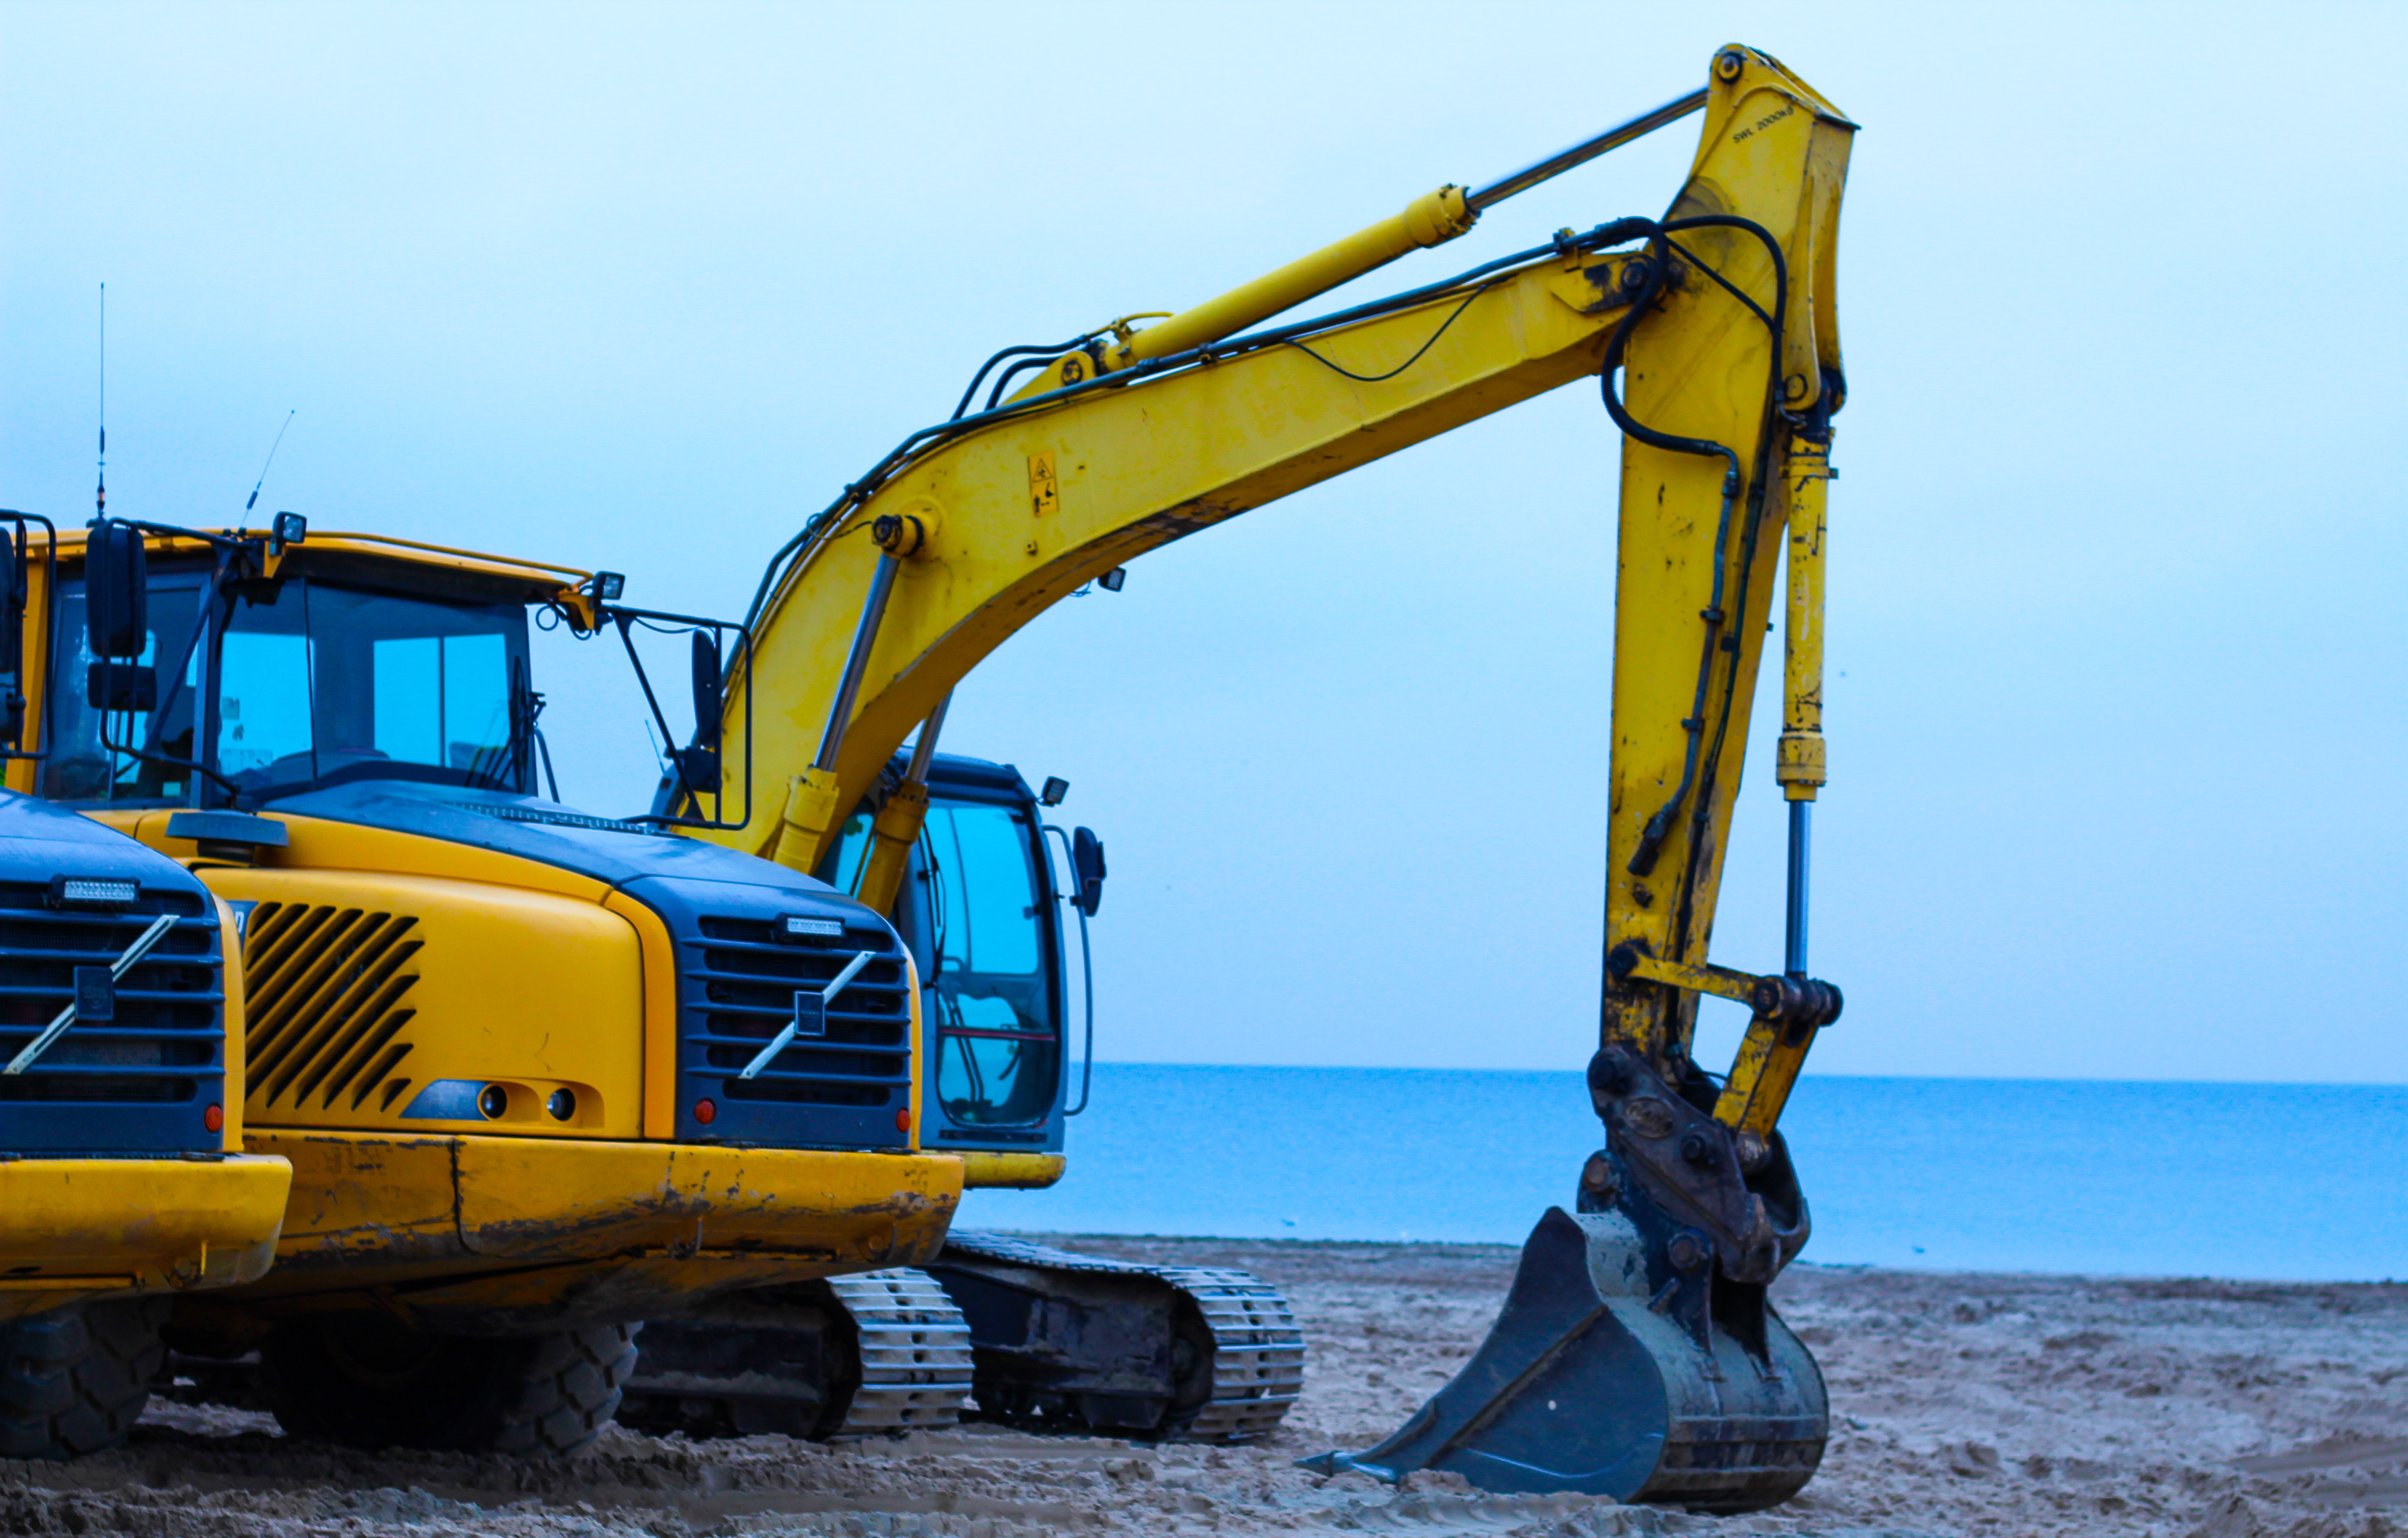 Construction Equipment Rental forecast to grow by 11 to 2023